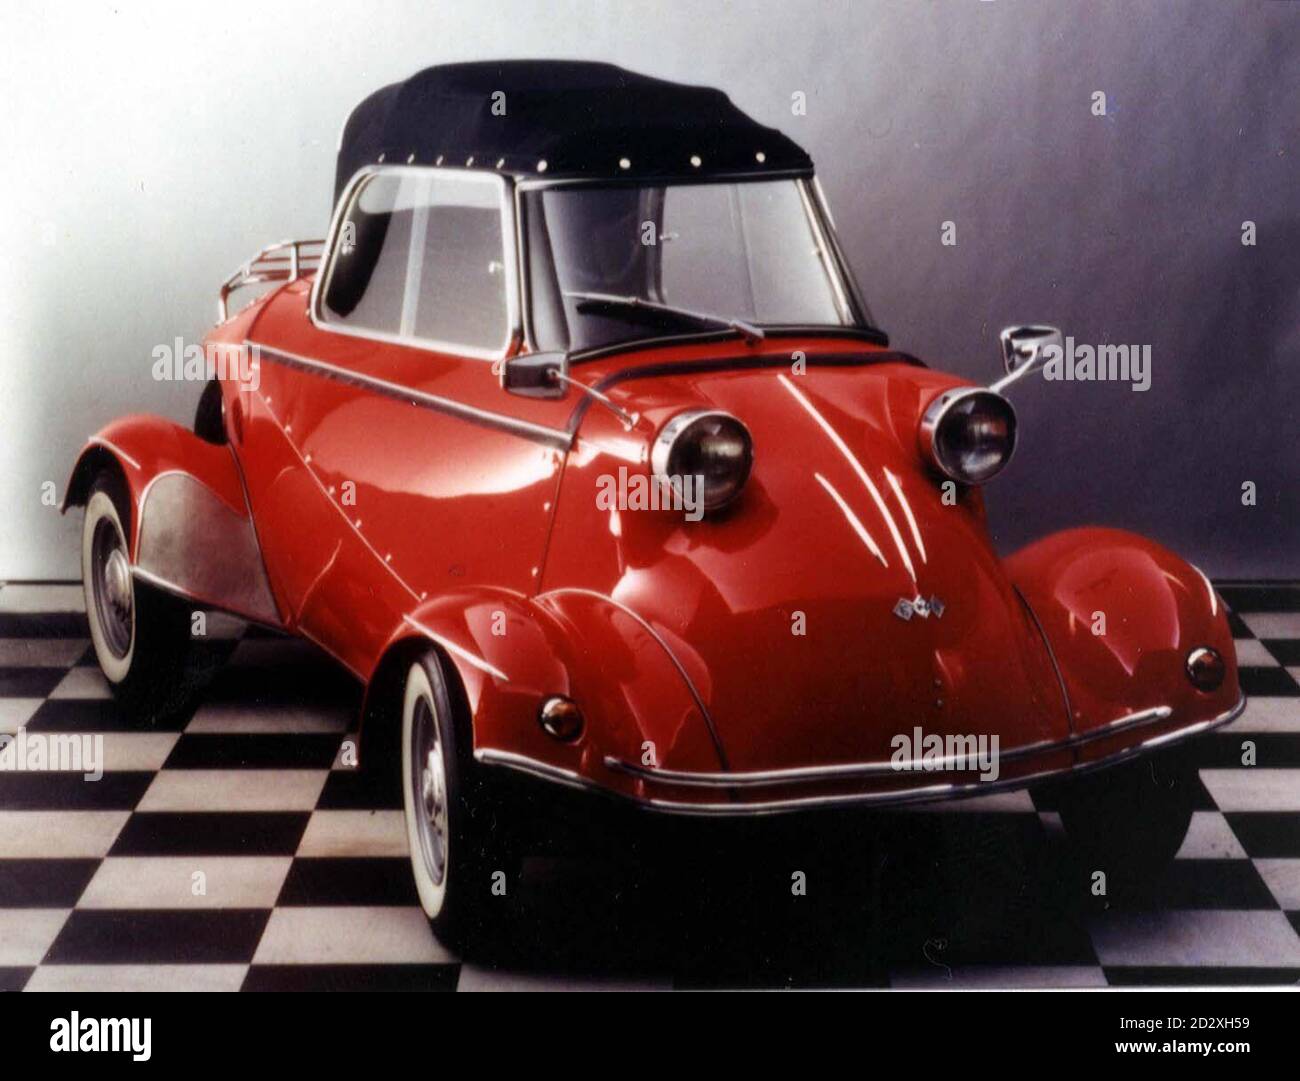 The 1960 Tg 500 Tiger 'bubble car' which is the top lot in a sale of the Bruce Weiner Microcar collection at Christie's in London on March 6, 1997. The high performance version of the Messerschmitt is expected to fetch between 15 - 18,000. The cars symbolized the Swingin' Sixties and are now a cult in Britain and Japan, where small is beautiful and ownership of a car depends on the size of the parking space. Canadian bubble gum magnate Weiner said: 'I saw this little picture of a Messerschmitt and I just couldn't believe it. I'd never seen anything like it. I had to have it'. See PA Story SAL Stock Photo